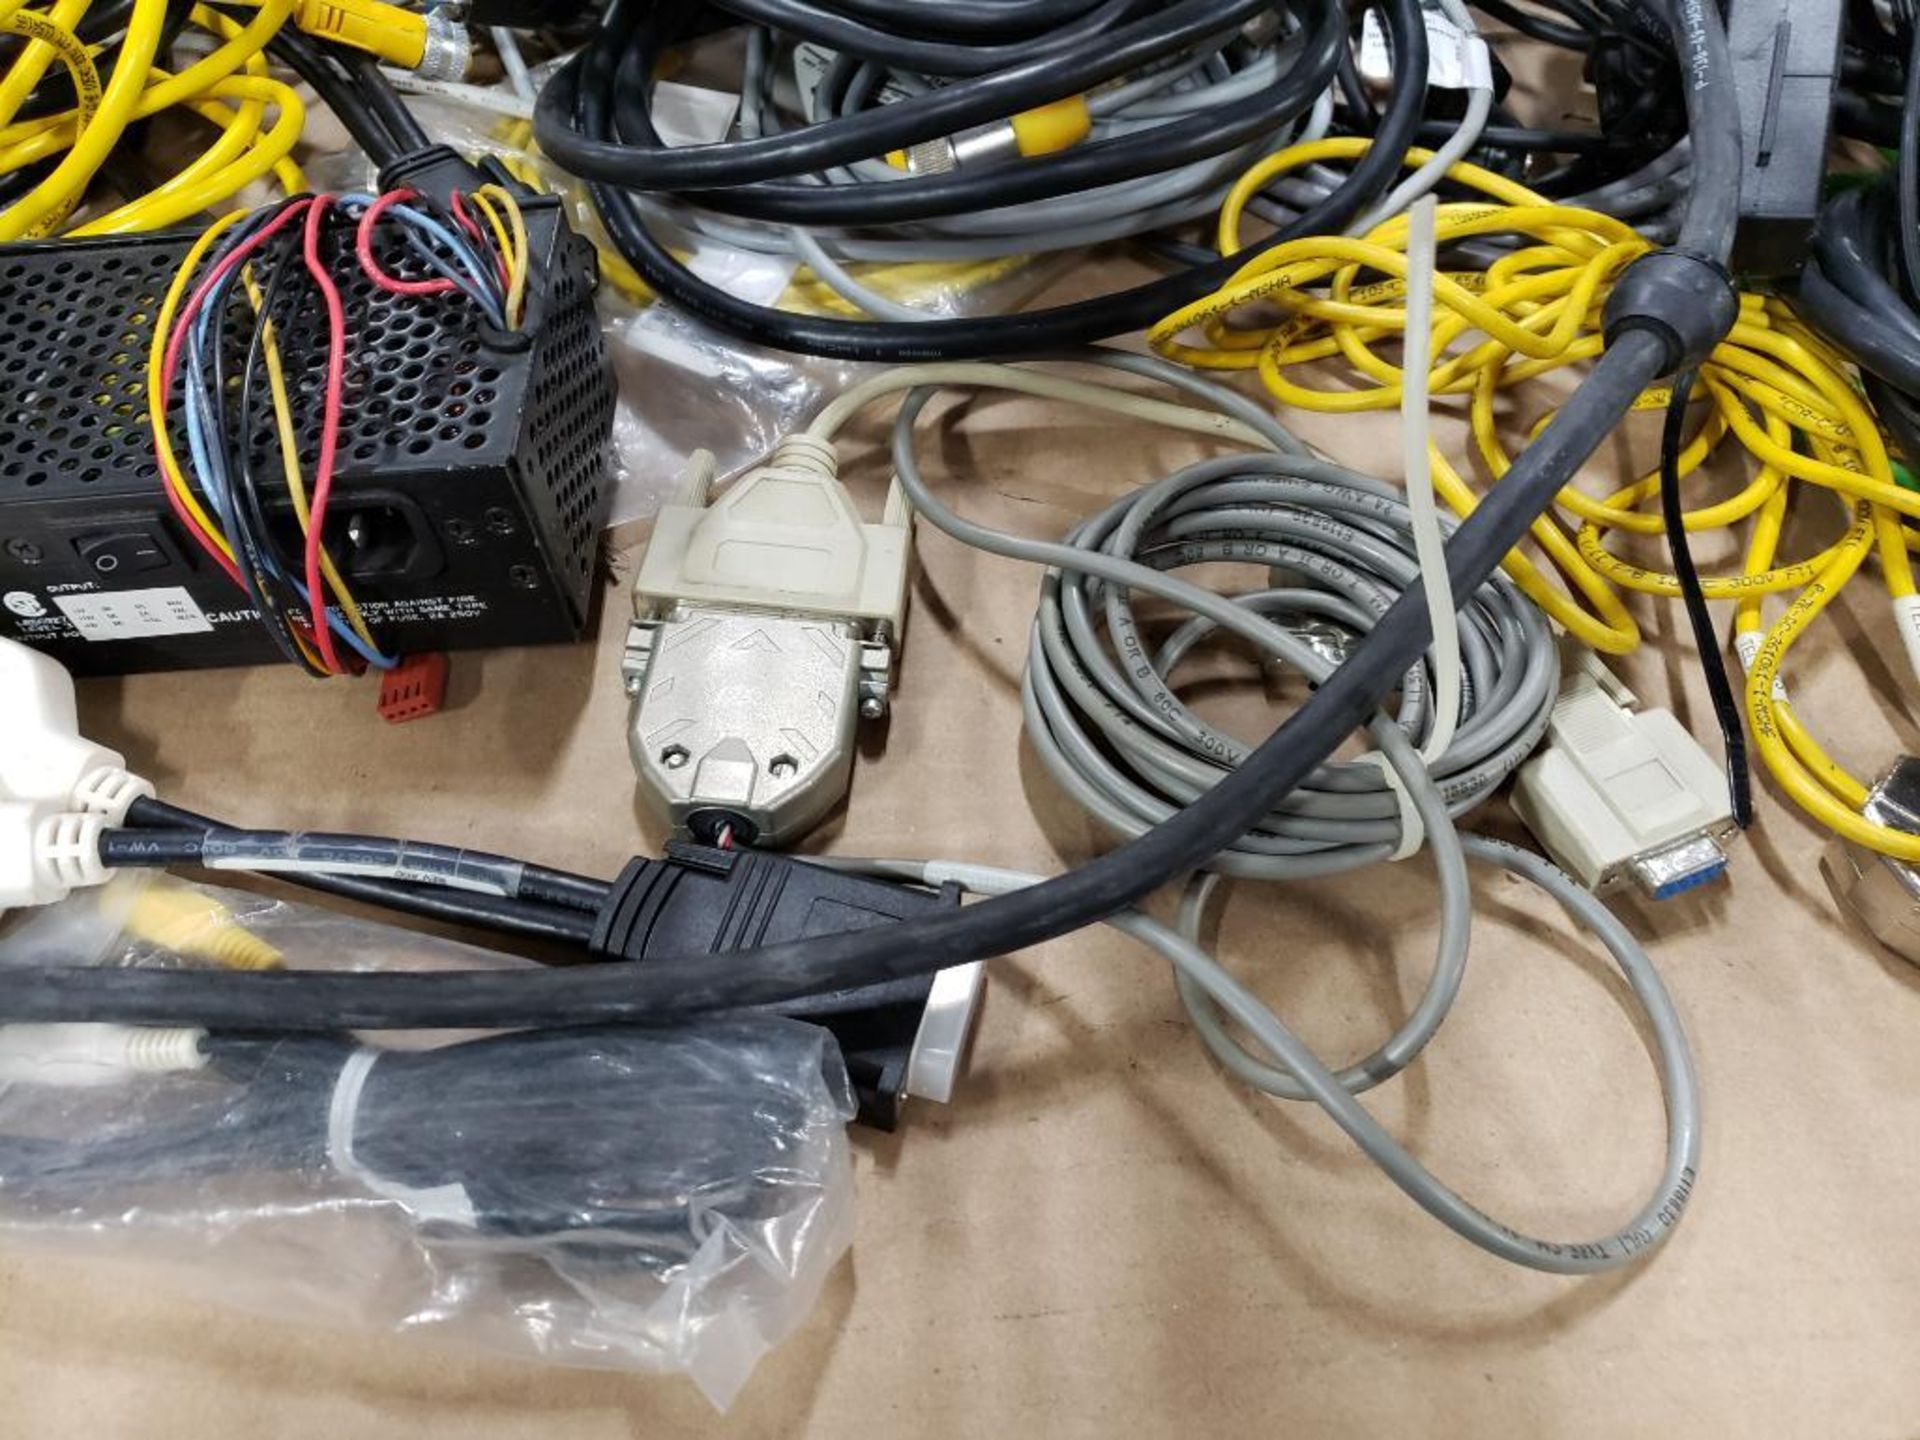 Large assortment of power and connection cordsets. - Image 8 of 10